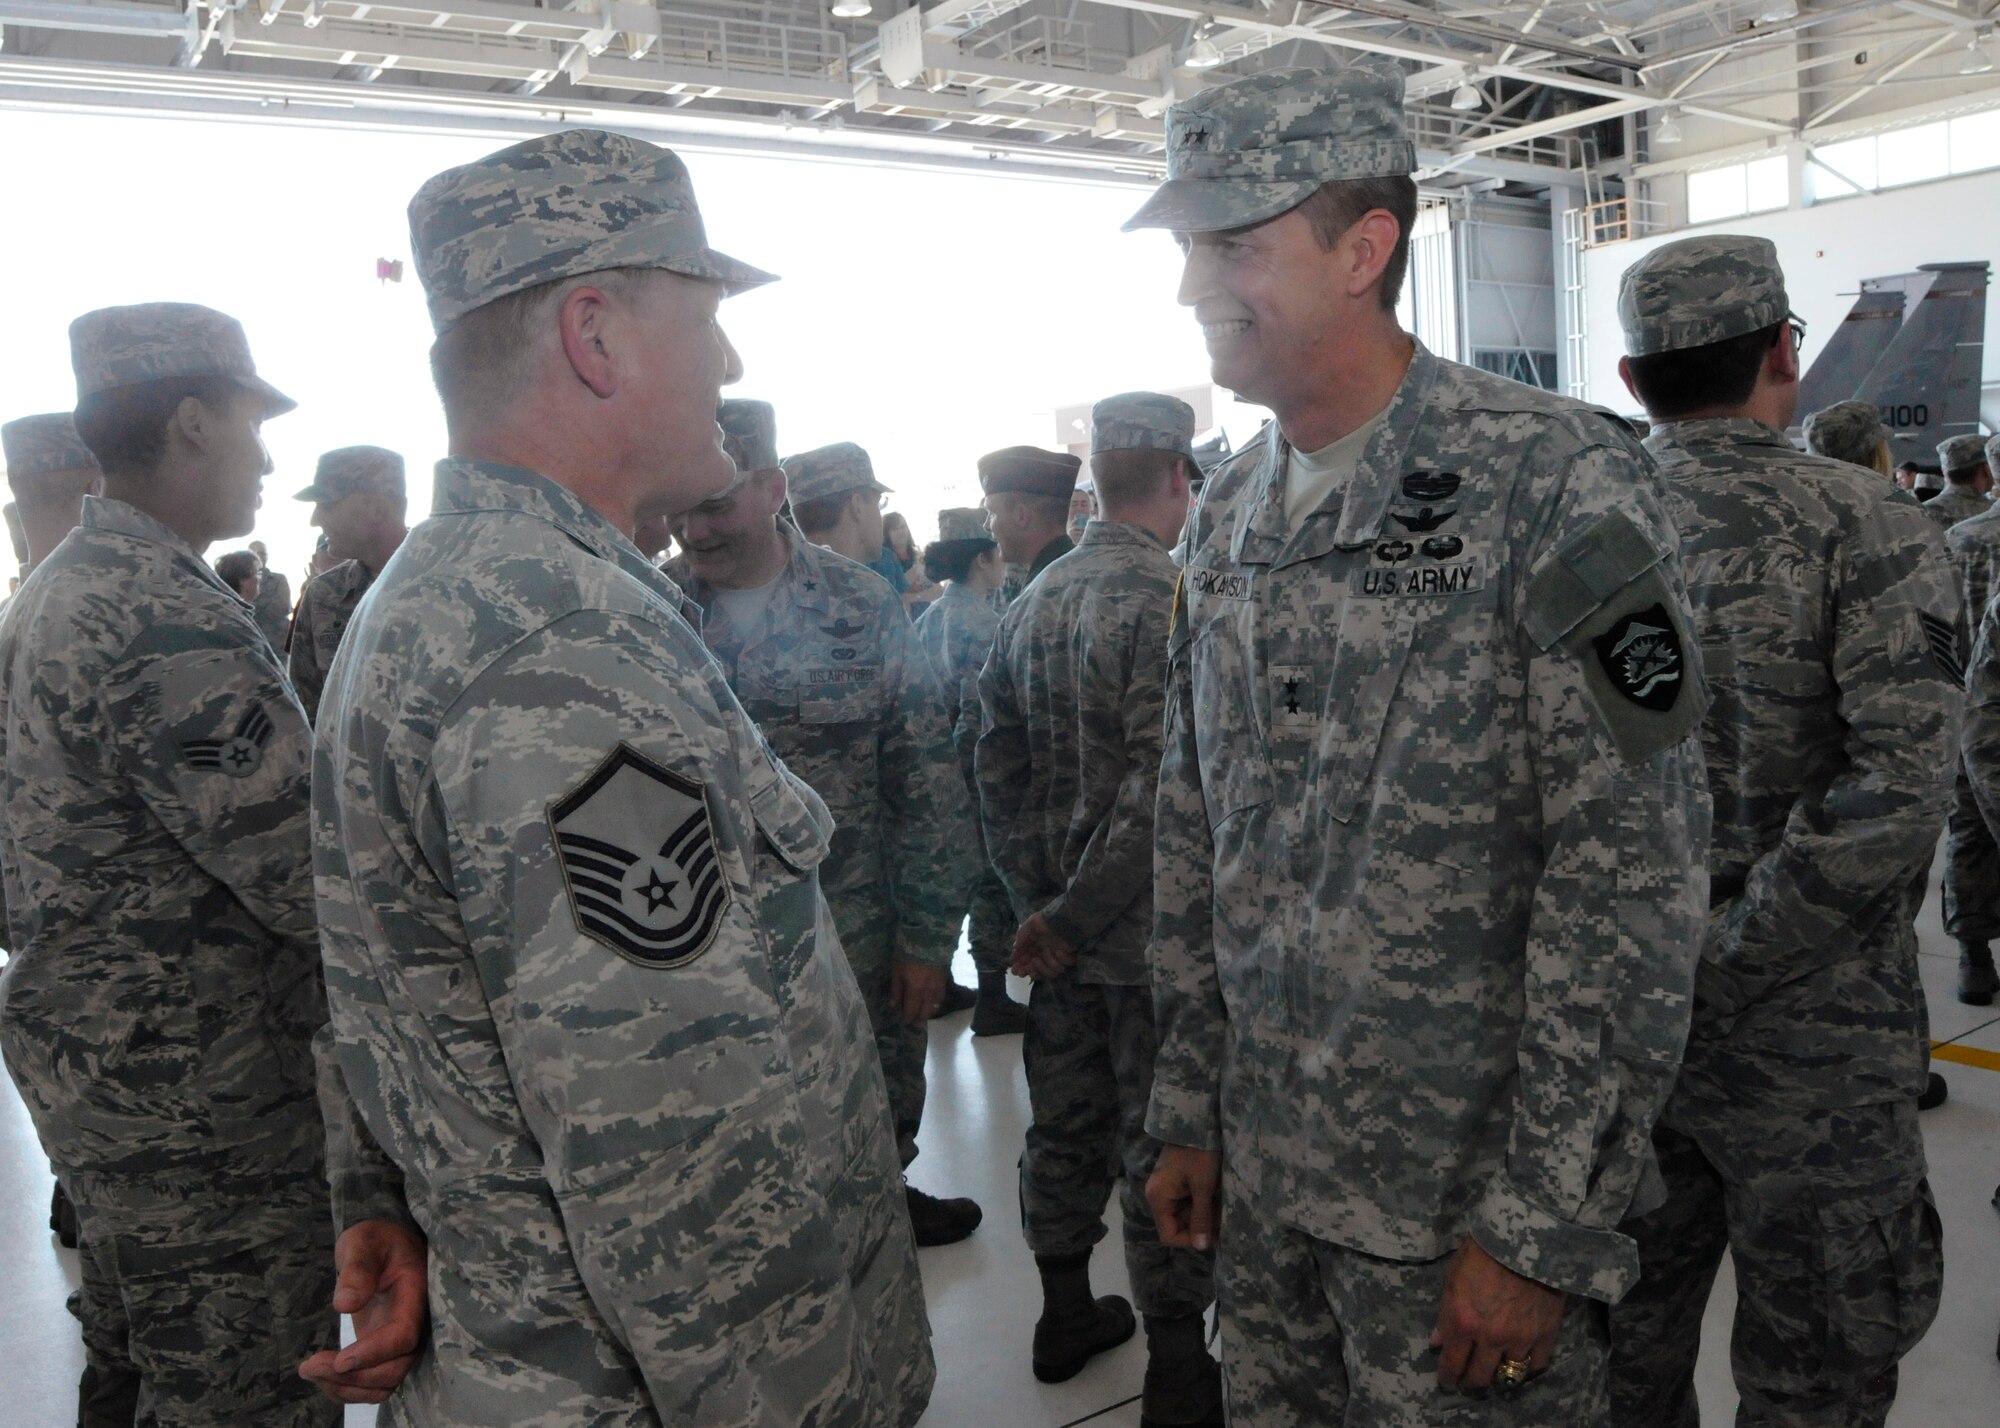 Army Maj. Gen. Daniel Hokanson, Adjutant General for Oregon, right, greets Airmen deploying in support of Operation Atlantic Resolve following the formal mobilization ceremony, June 26, 2015, Portland Air National Guard Base, Ore. (U.S. Air National Guard photo by Tech. Sgt. John Hughel, 142nd Fighter Wing Public Affairs/Released)